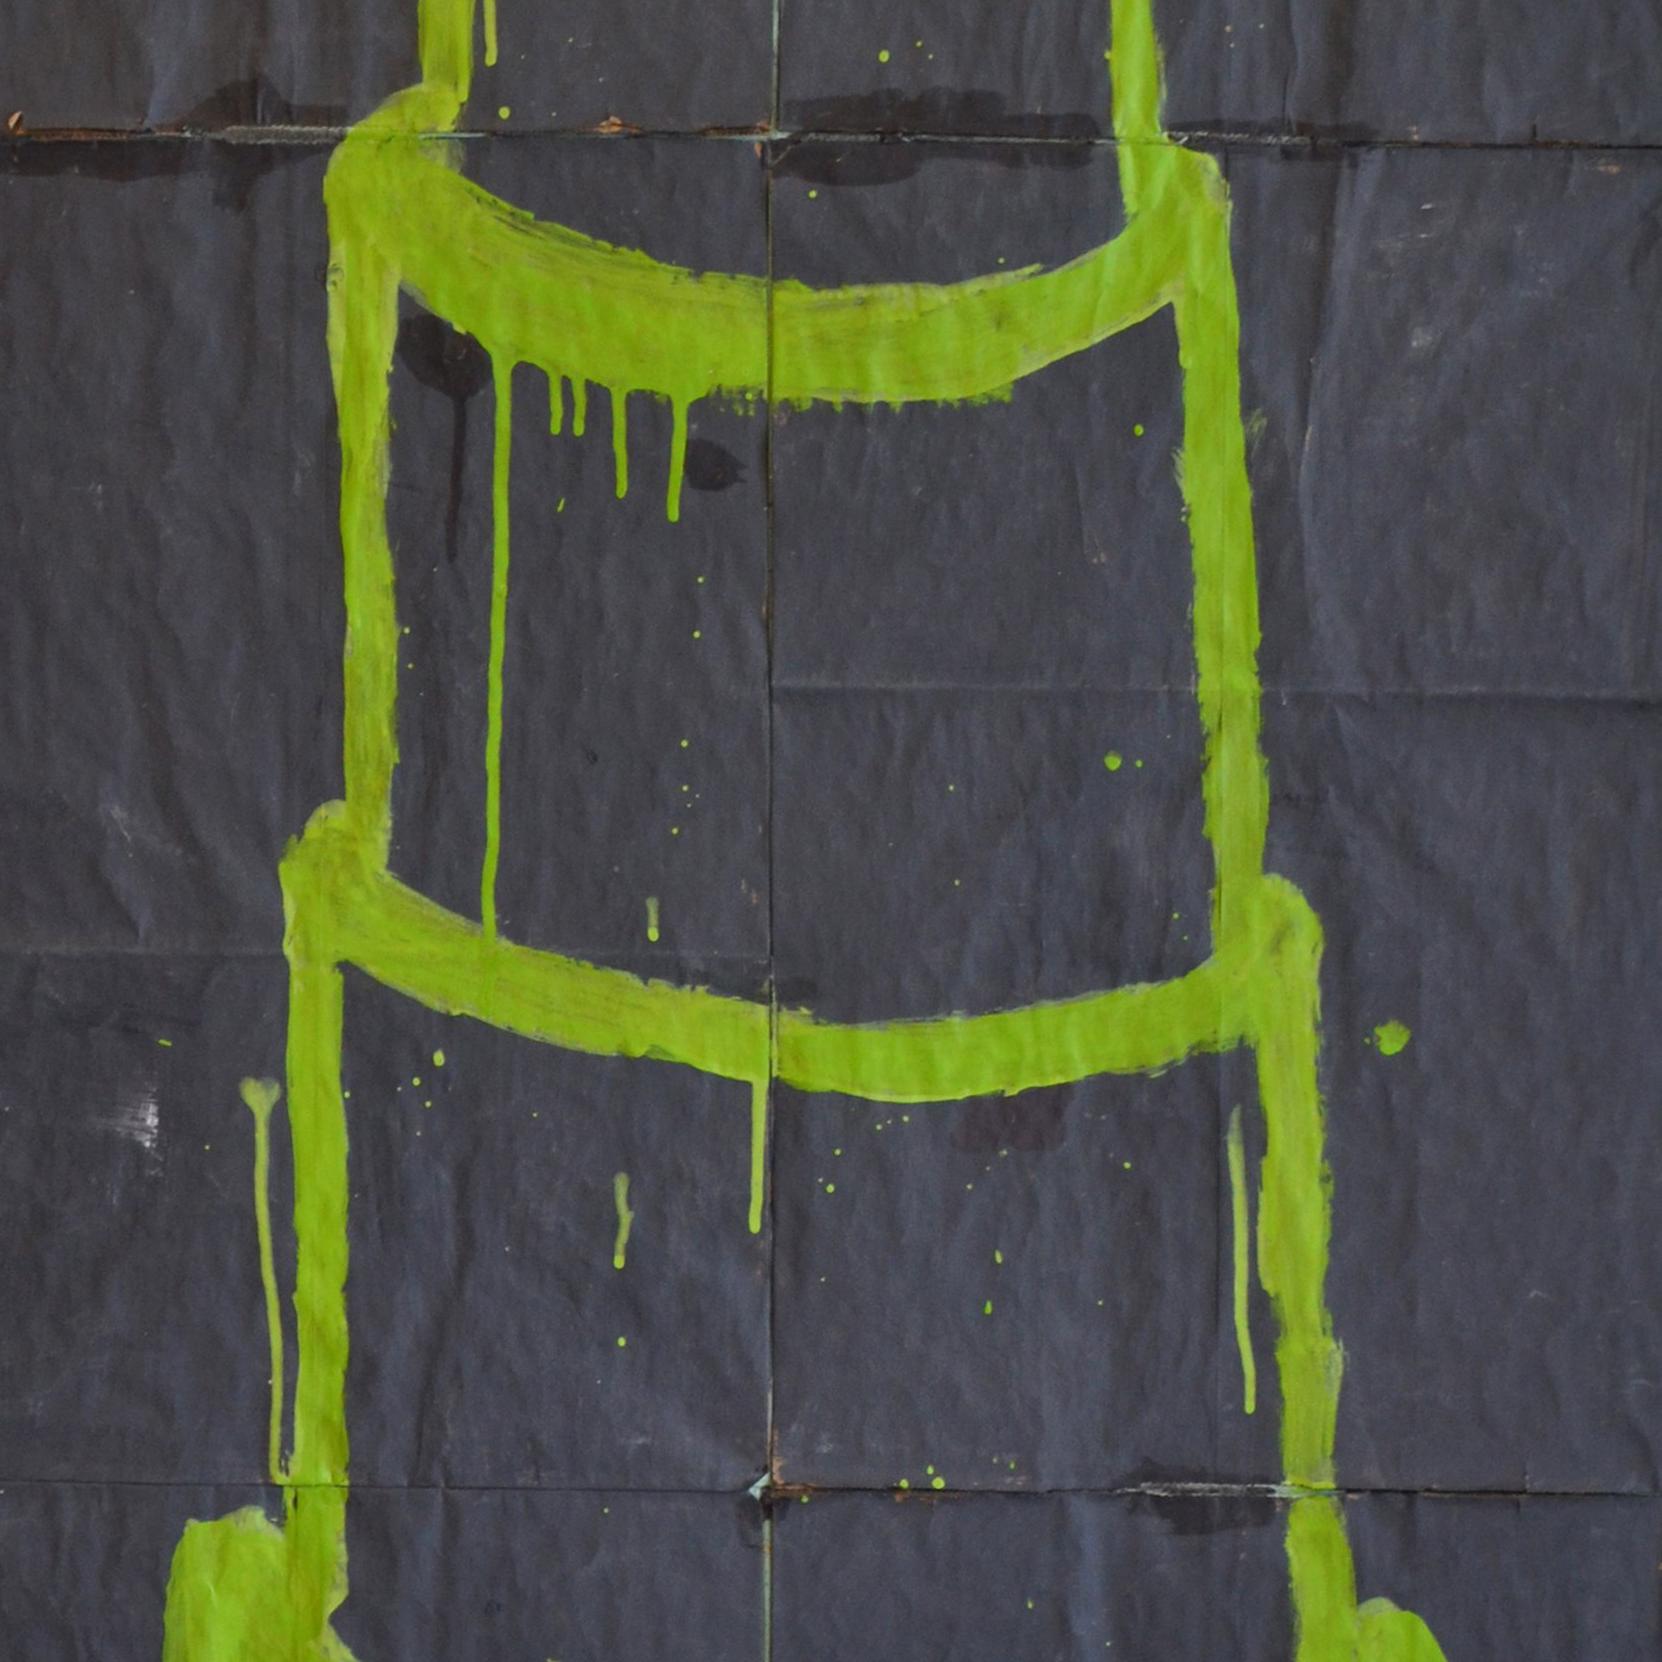 Mixed media painting of cake, Gary Komarin, Cake 5 (Lime on Charcoal ) 3